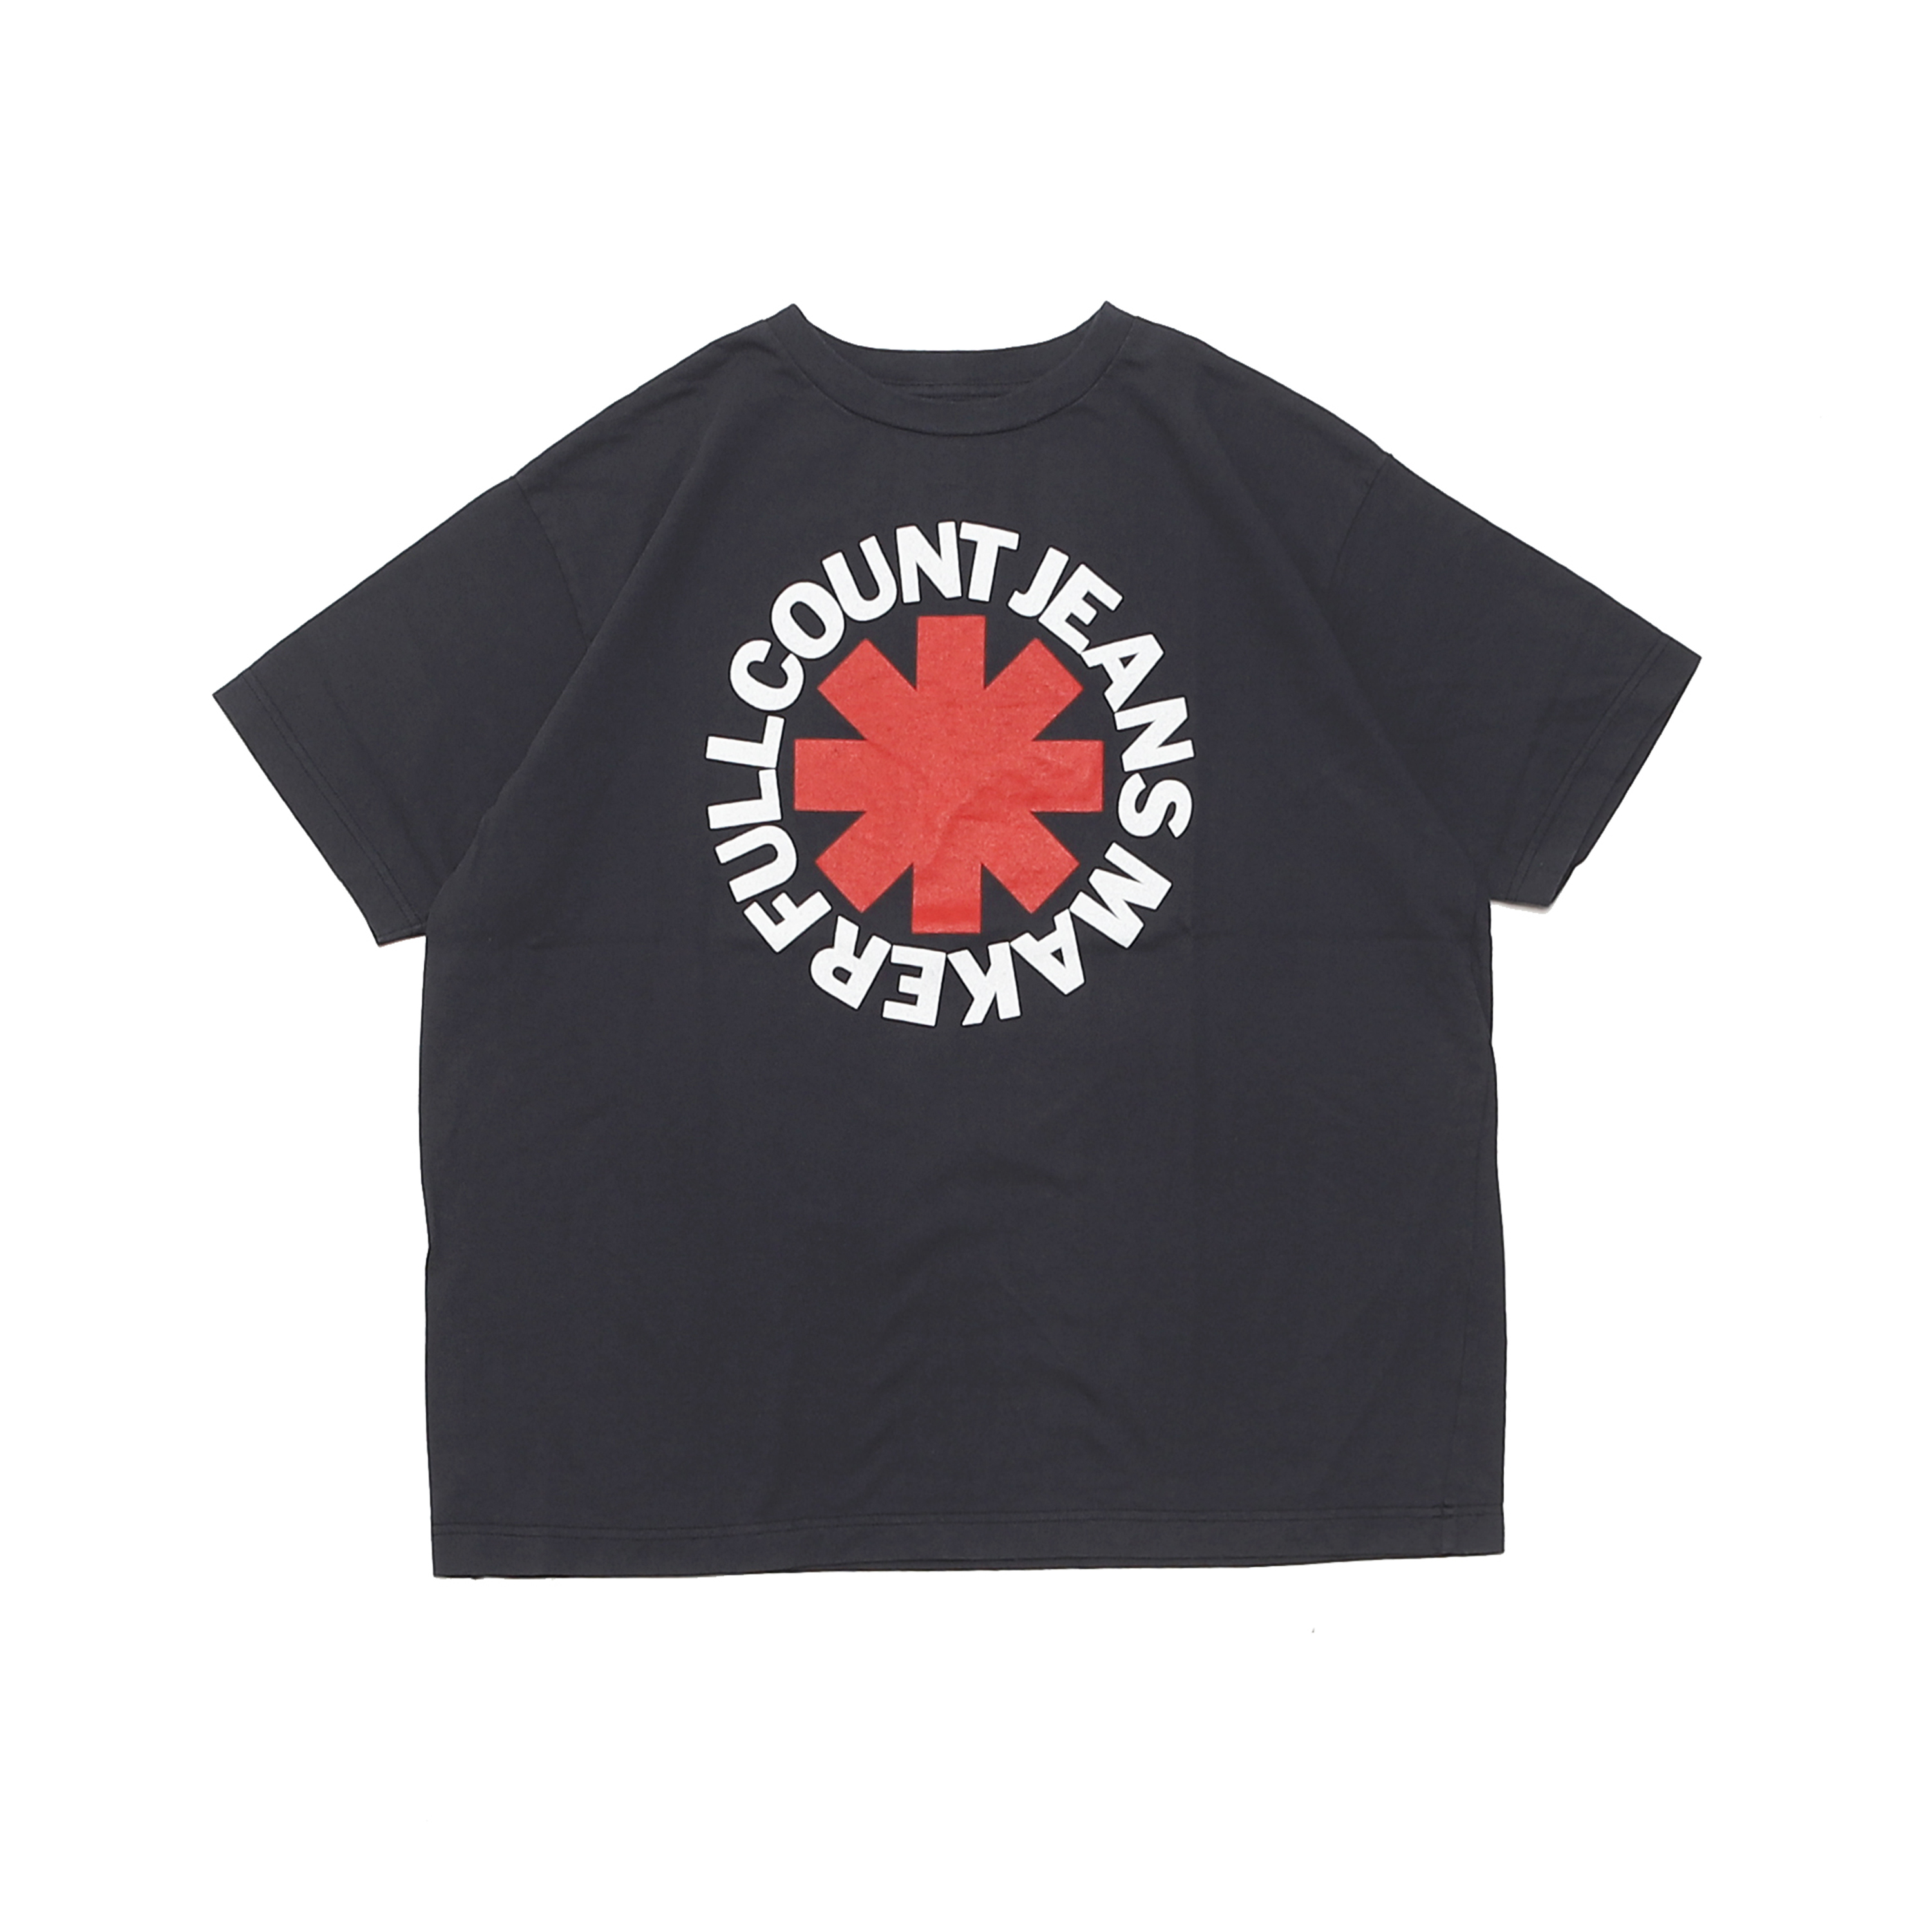 FULLCOUNT JEANS MAKERS S/S T-SHIRTS - INK BLACK